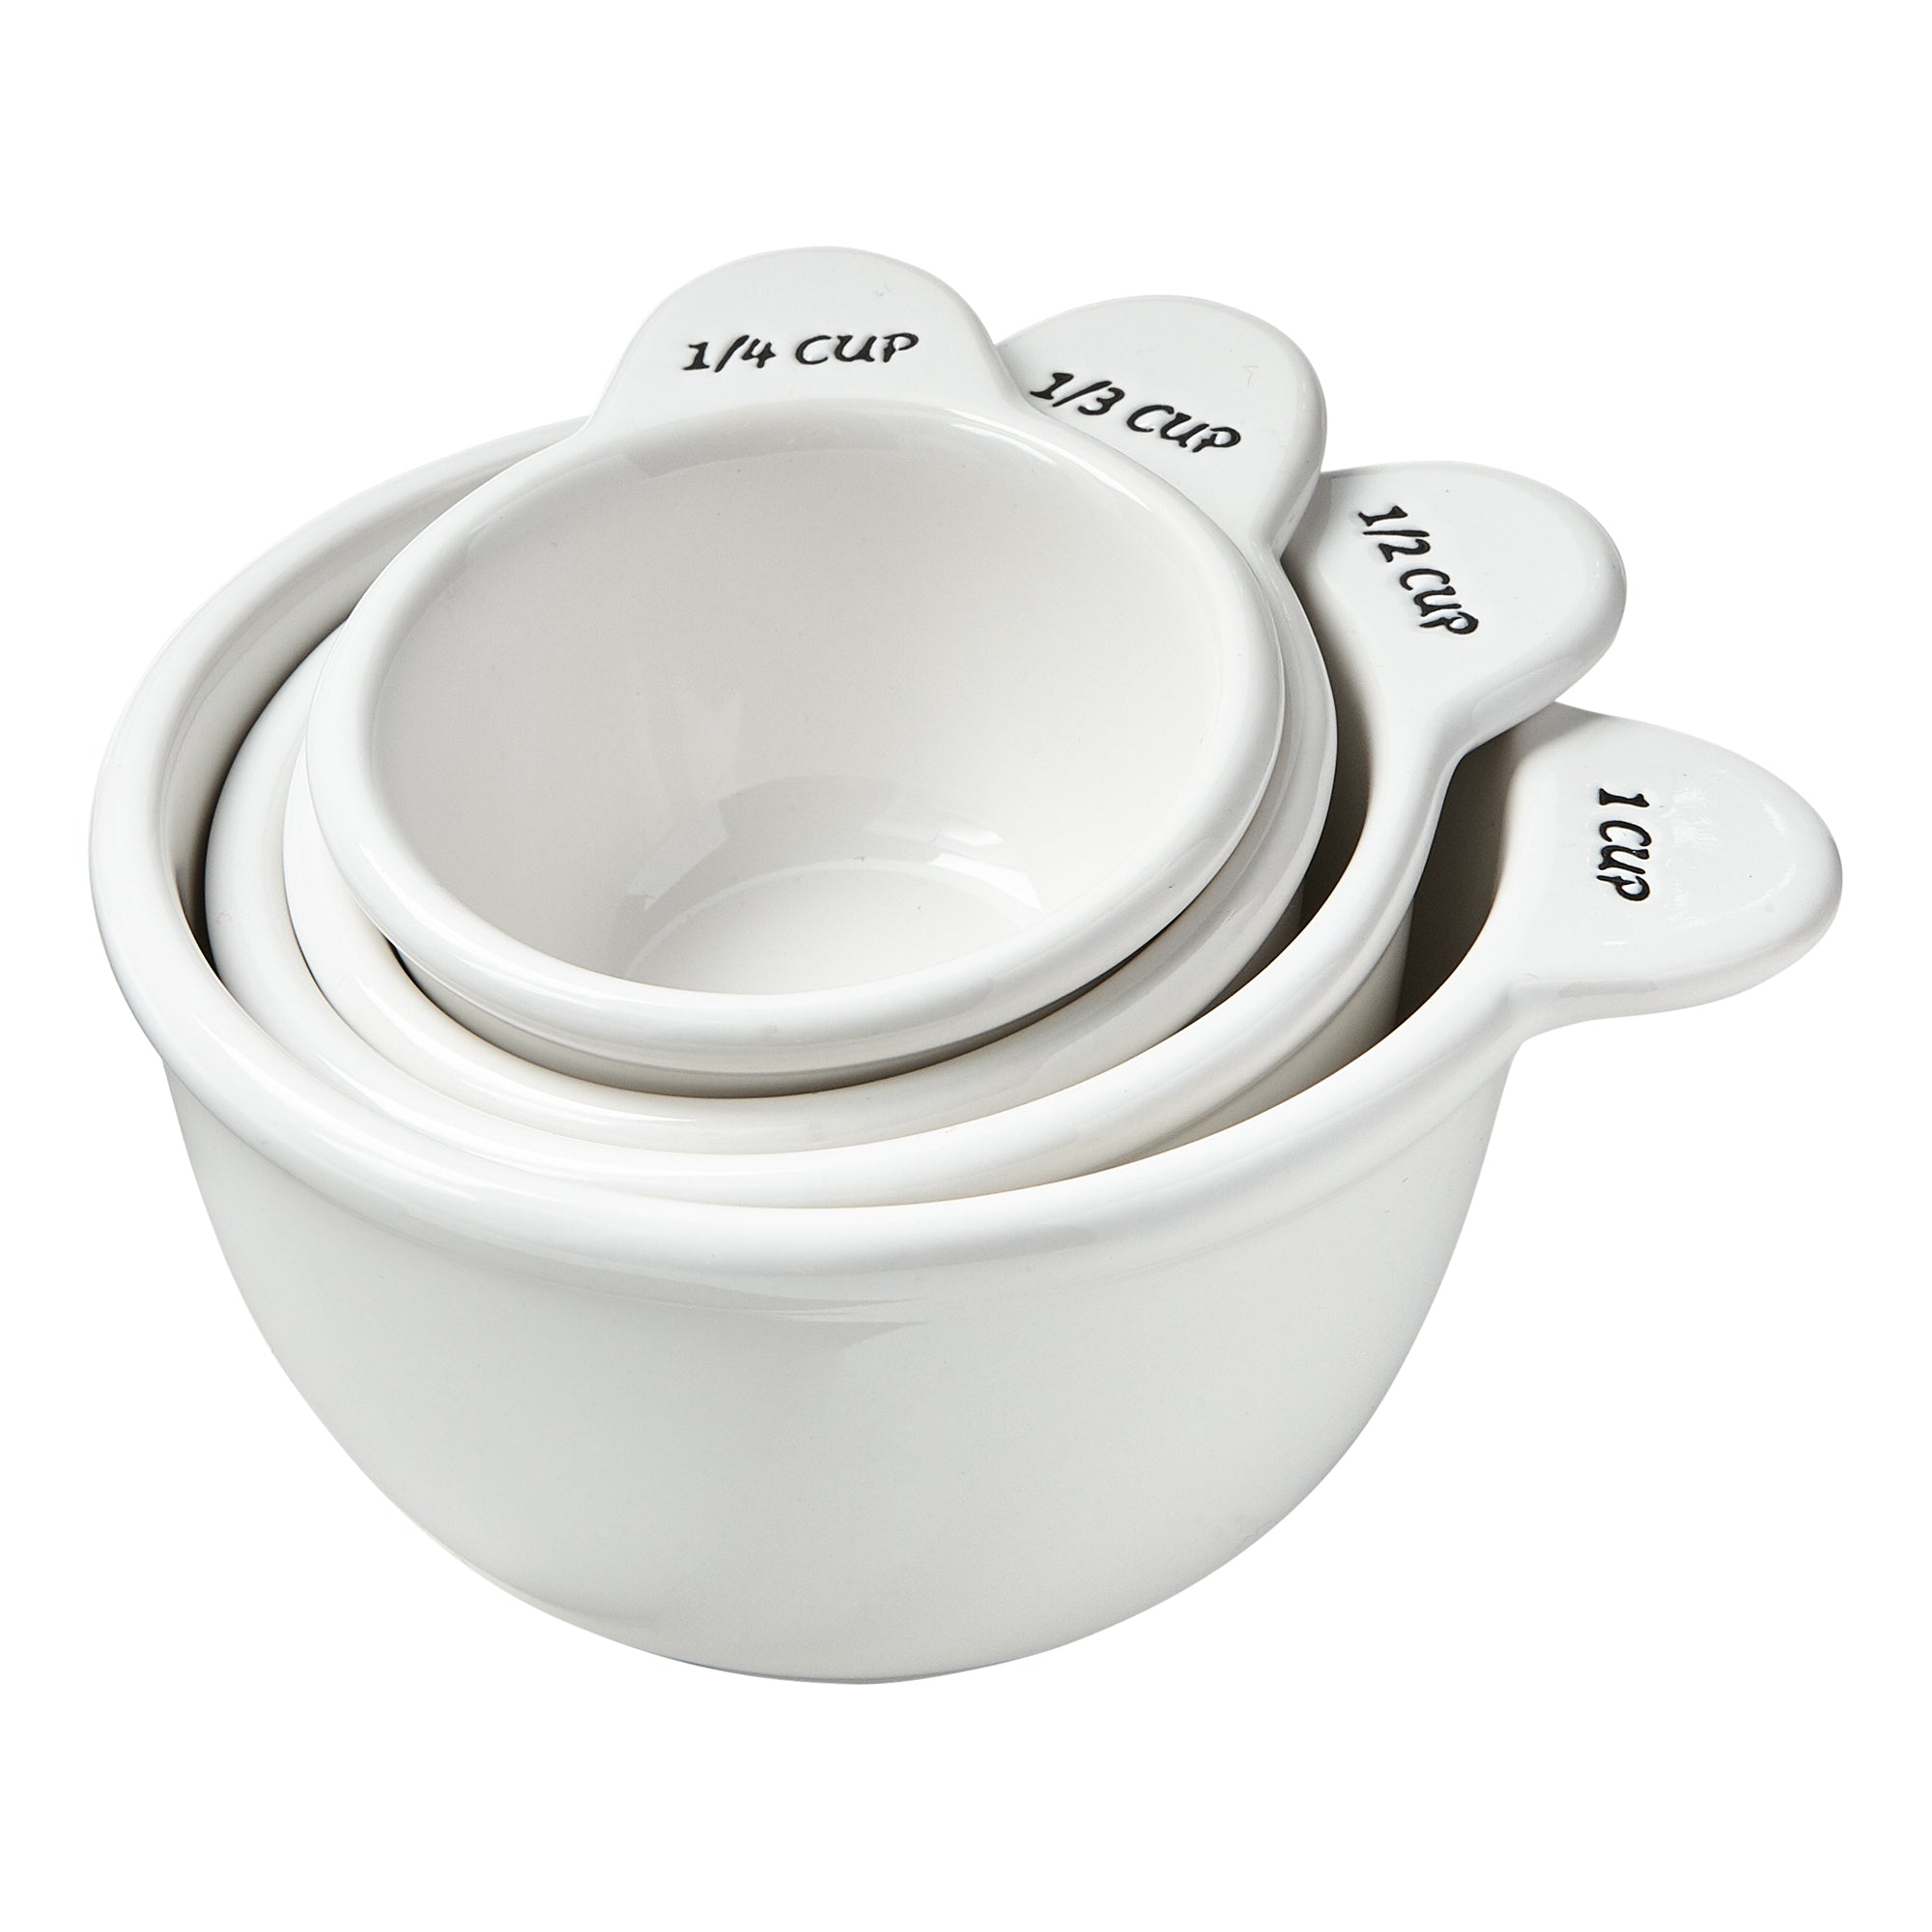 HTG Measuring Cups - Cheap Measuring Cups for Gardening